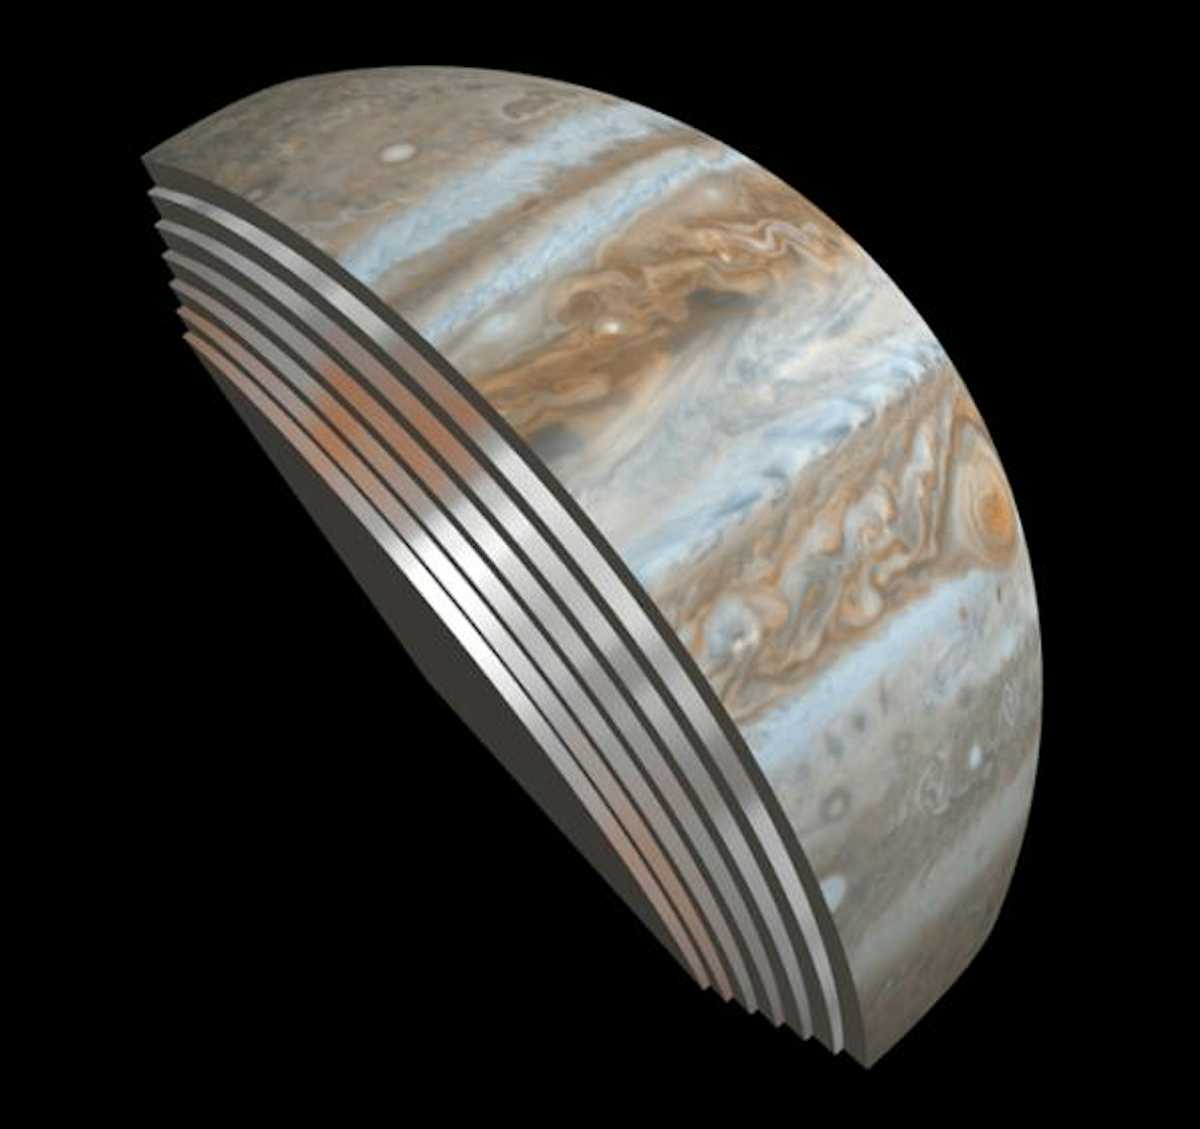 It's been a turbulent start; but Juno is now delivering spectacular